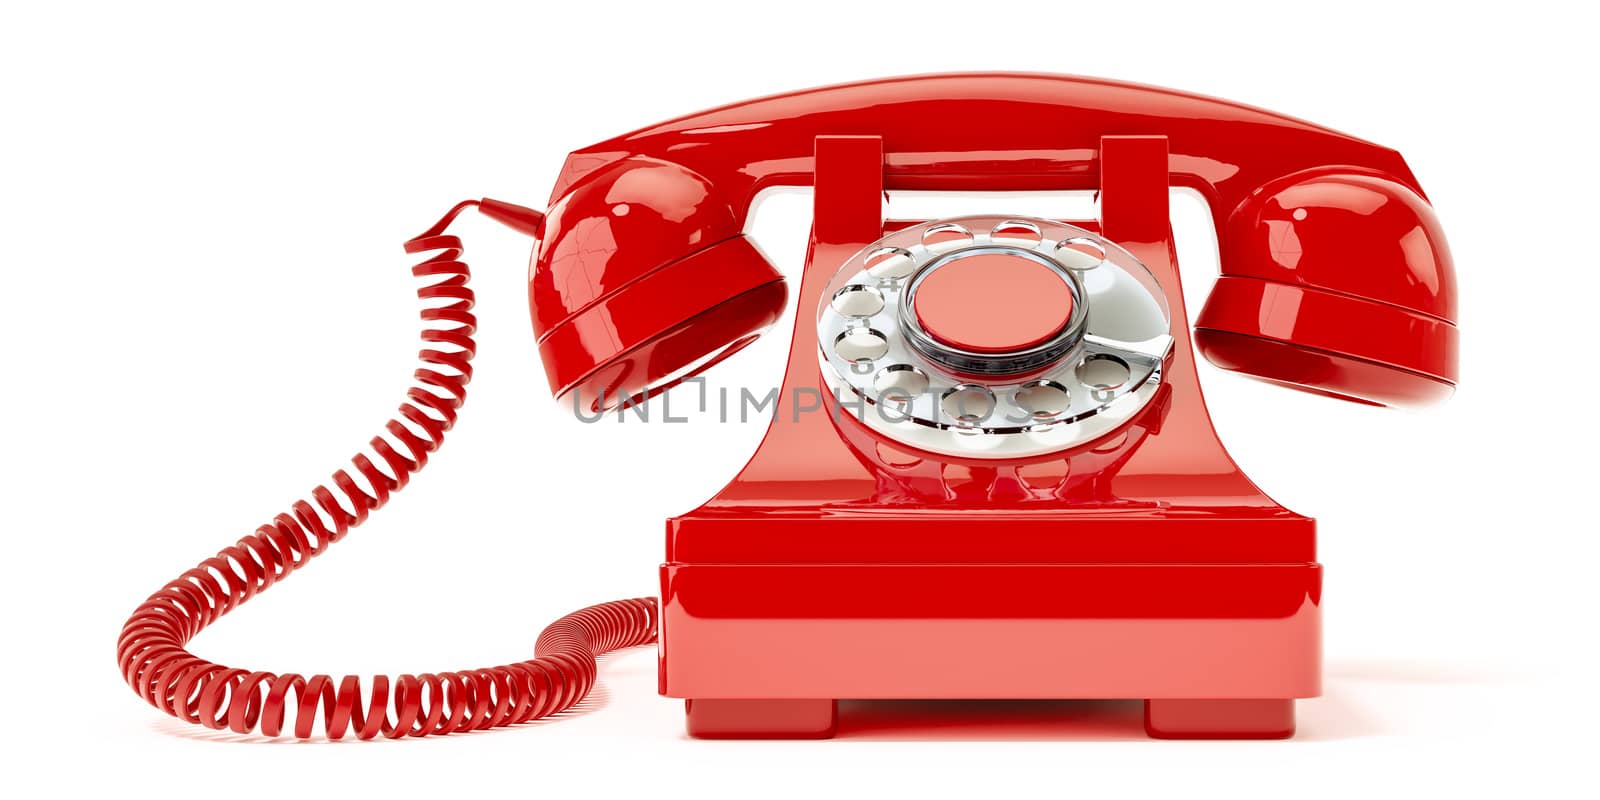 3d illustration of an old red phone